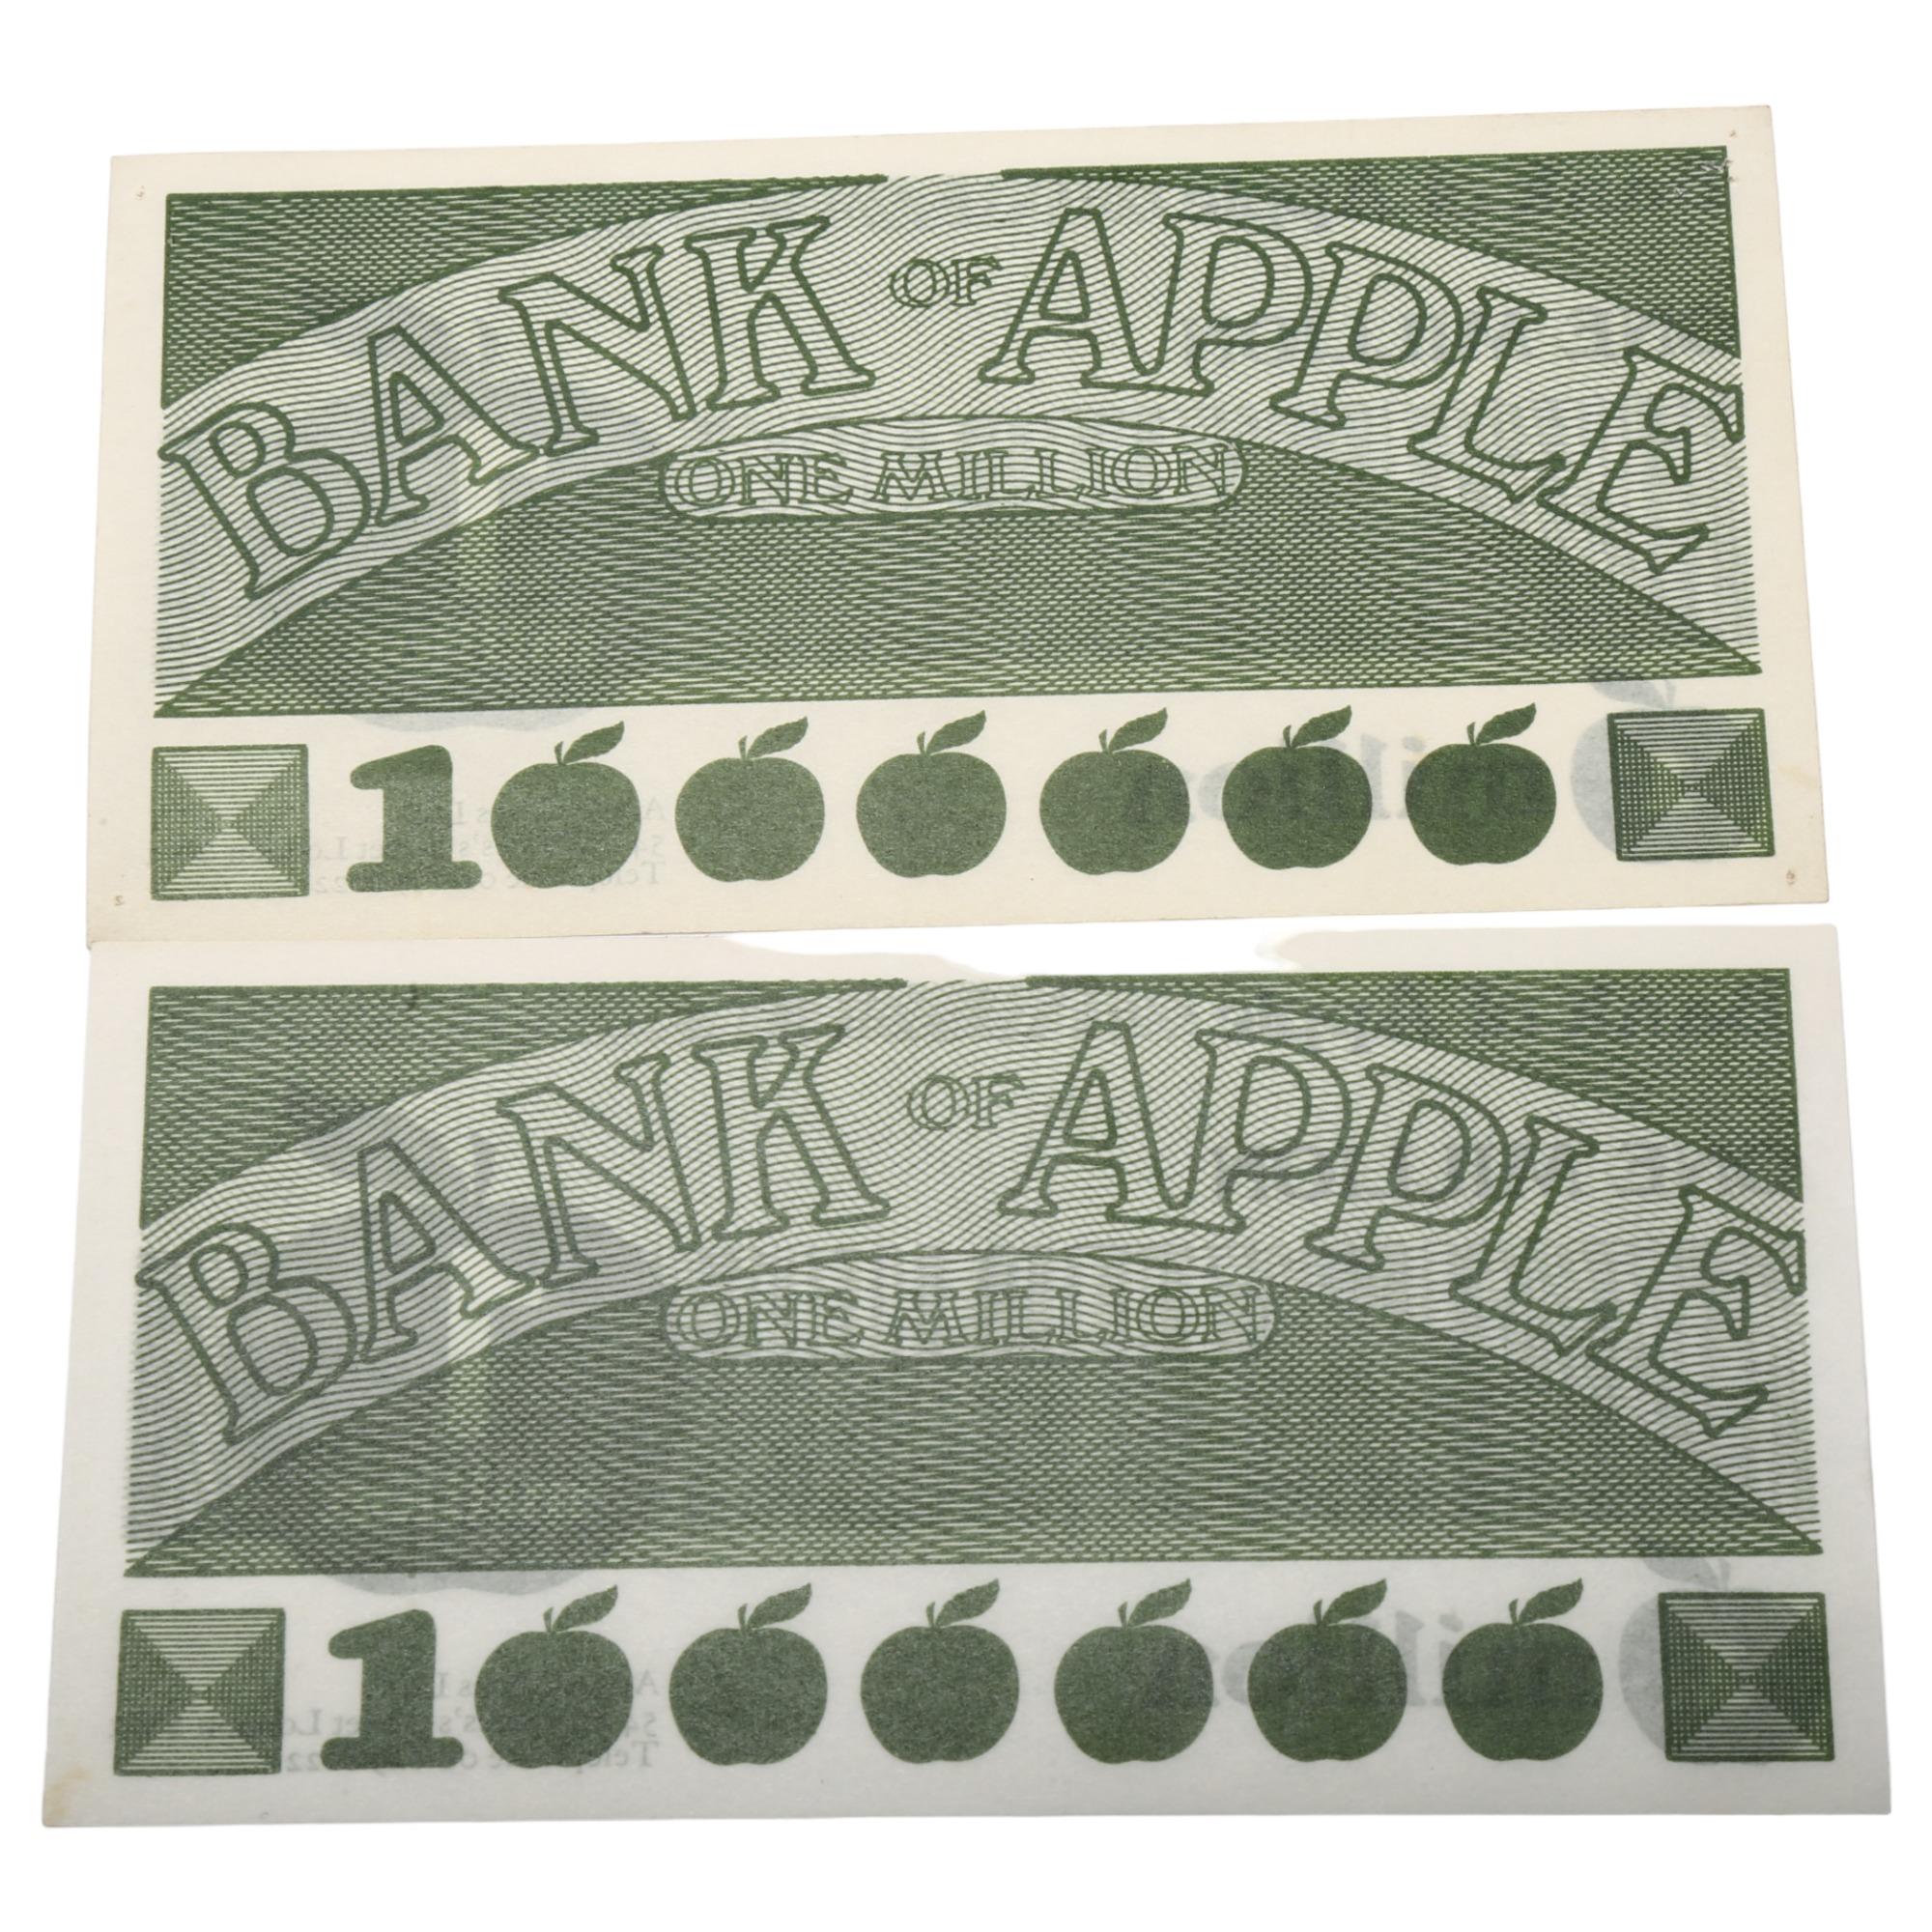 Beatles Interest - A pair of Bank of Apple, One Million, promotional notes, 14.5 x 7.5cm Vendor